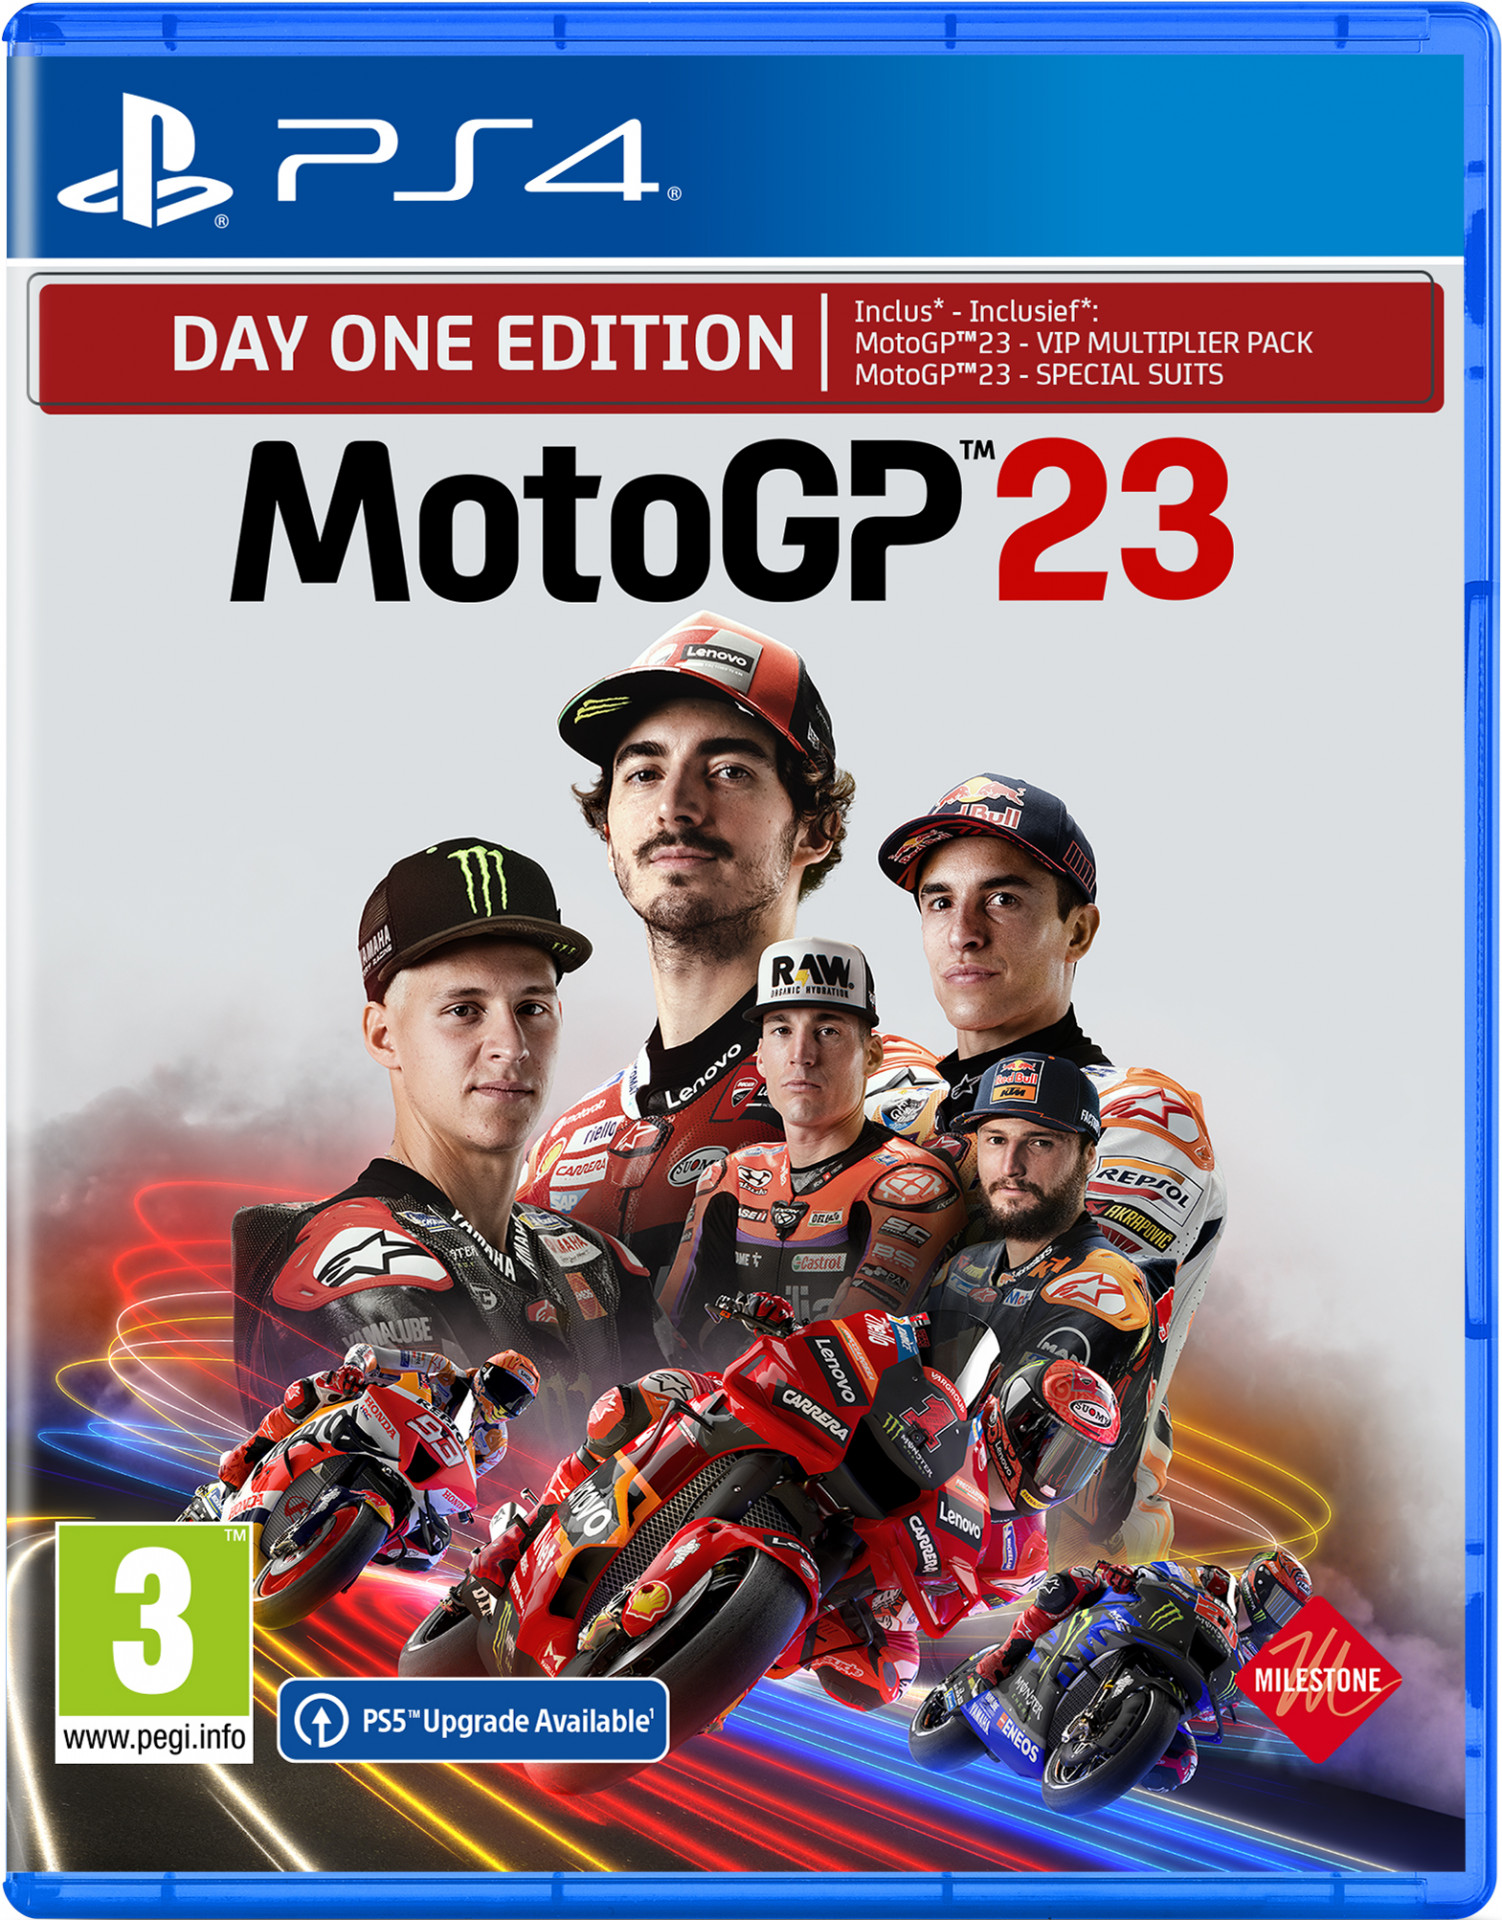 MotoGP 23 - Day One Edition